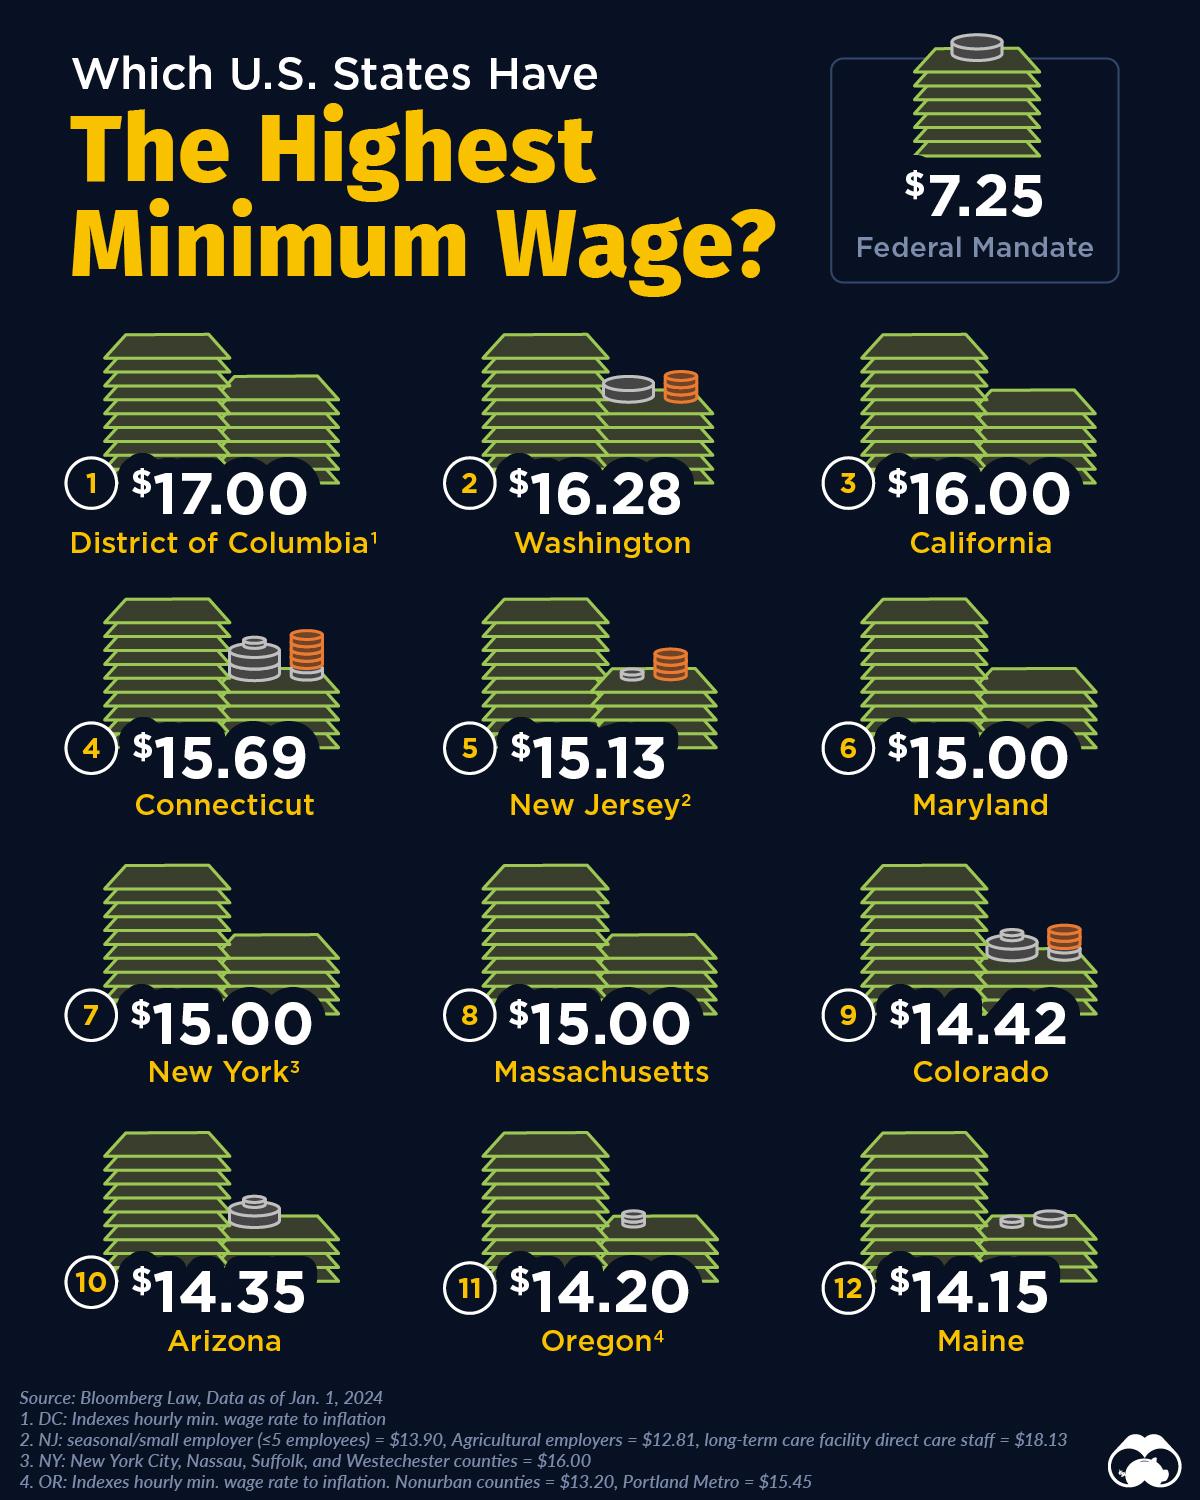 Which U.S. States Have the Highest Minimum Wage?